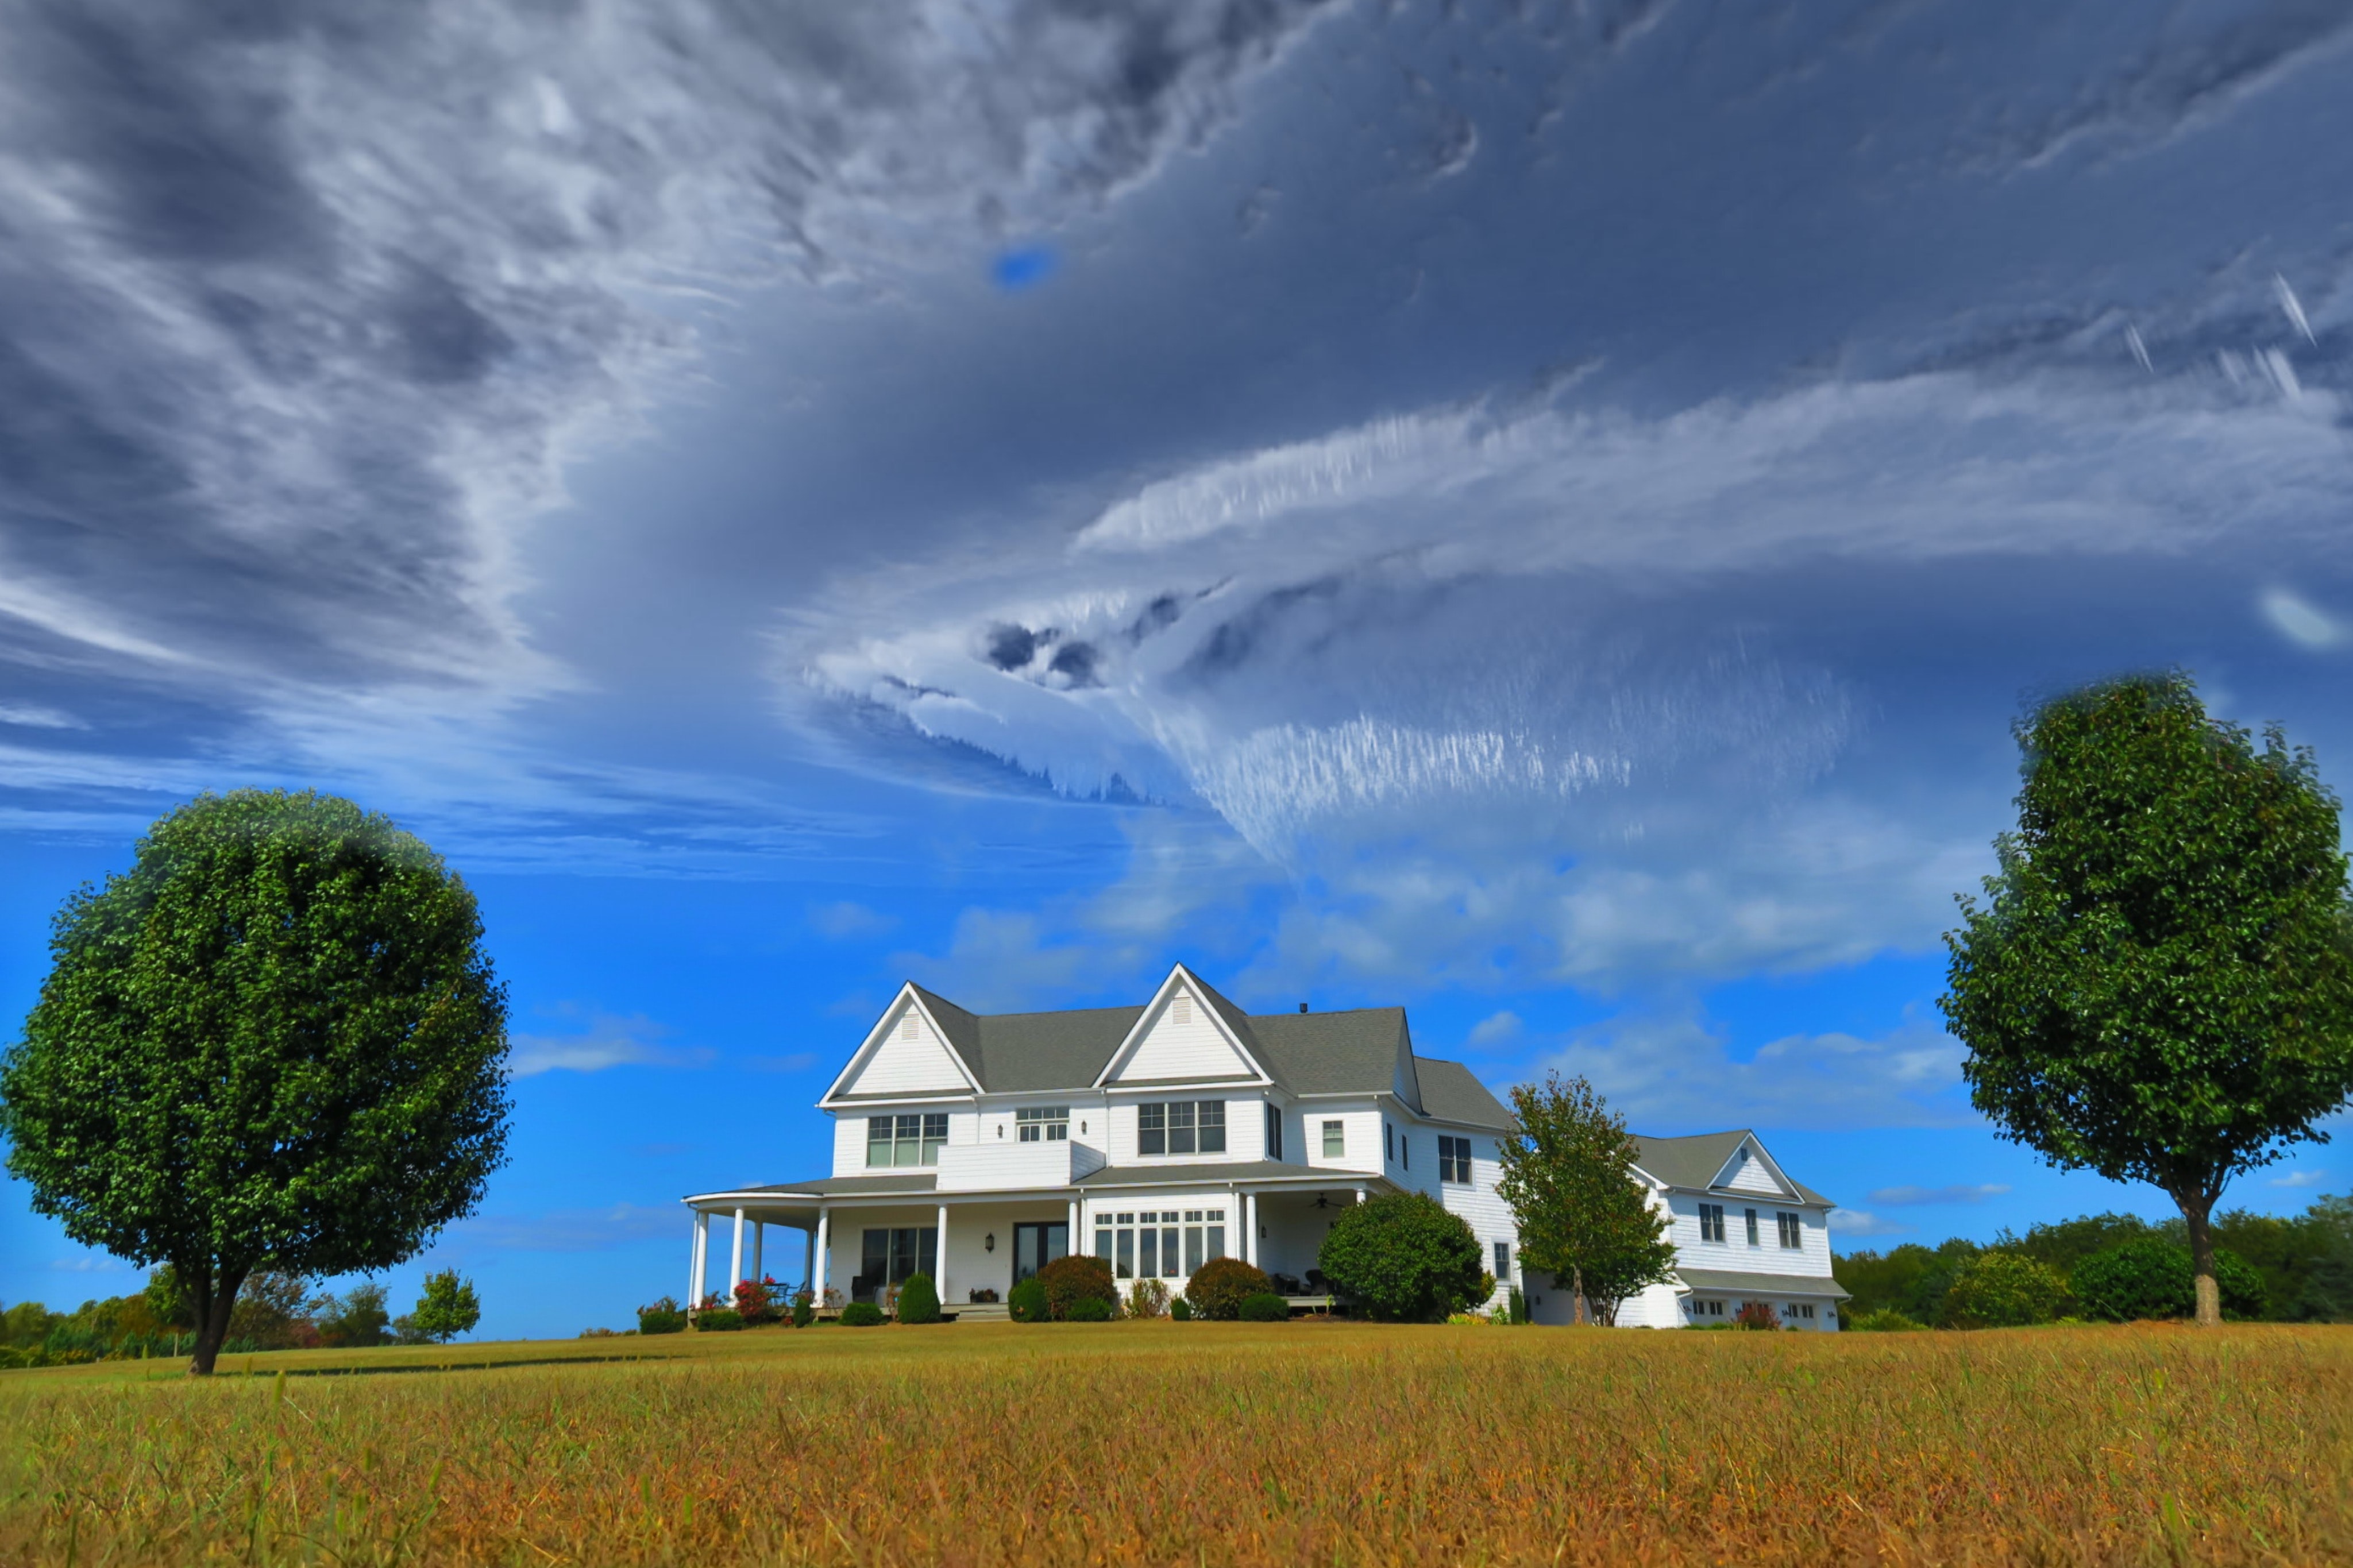 White country home on property with two trees and swirling clouds.